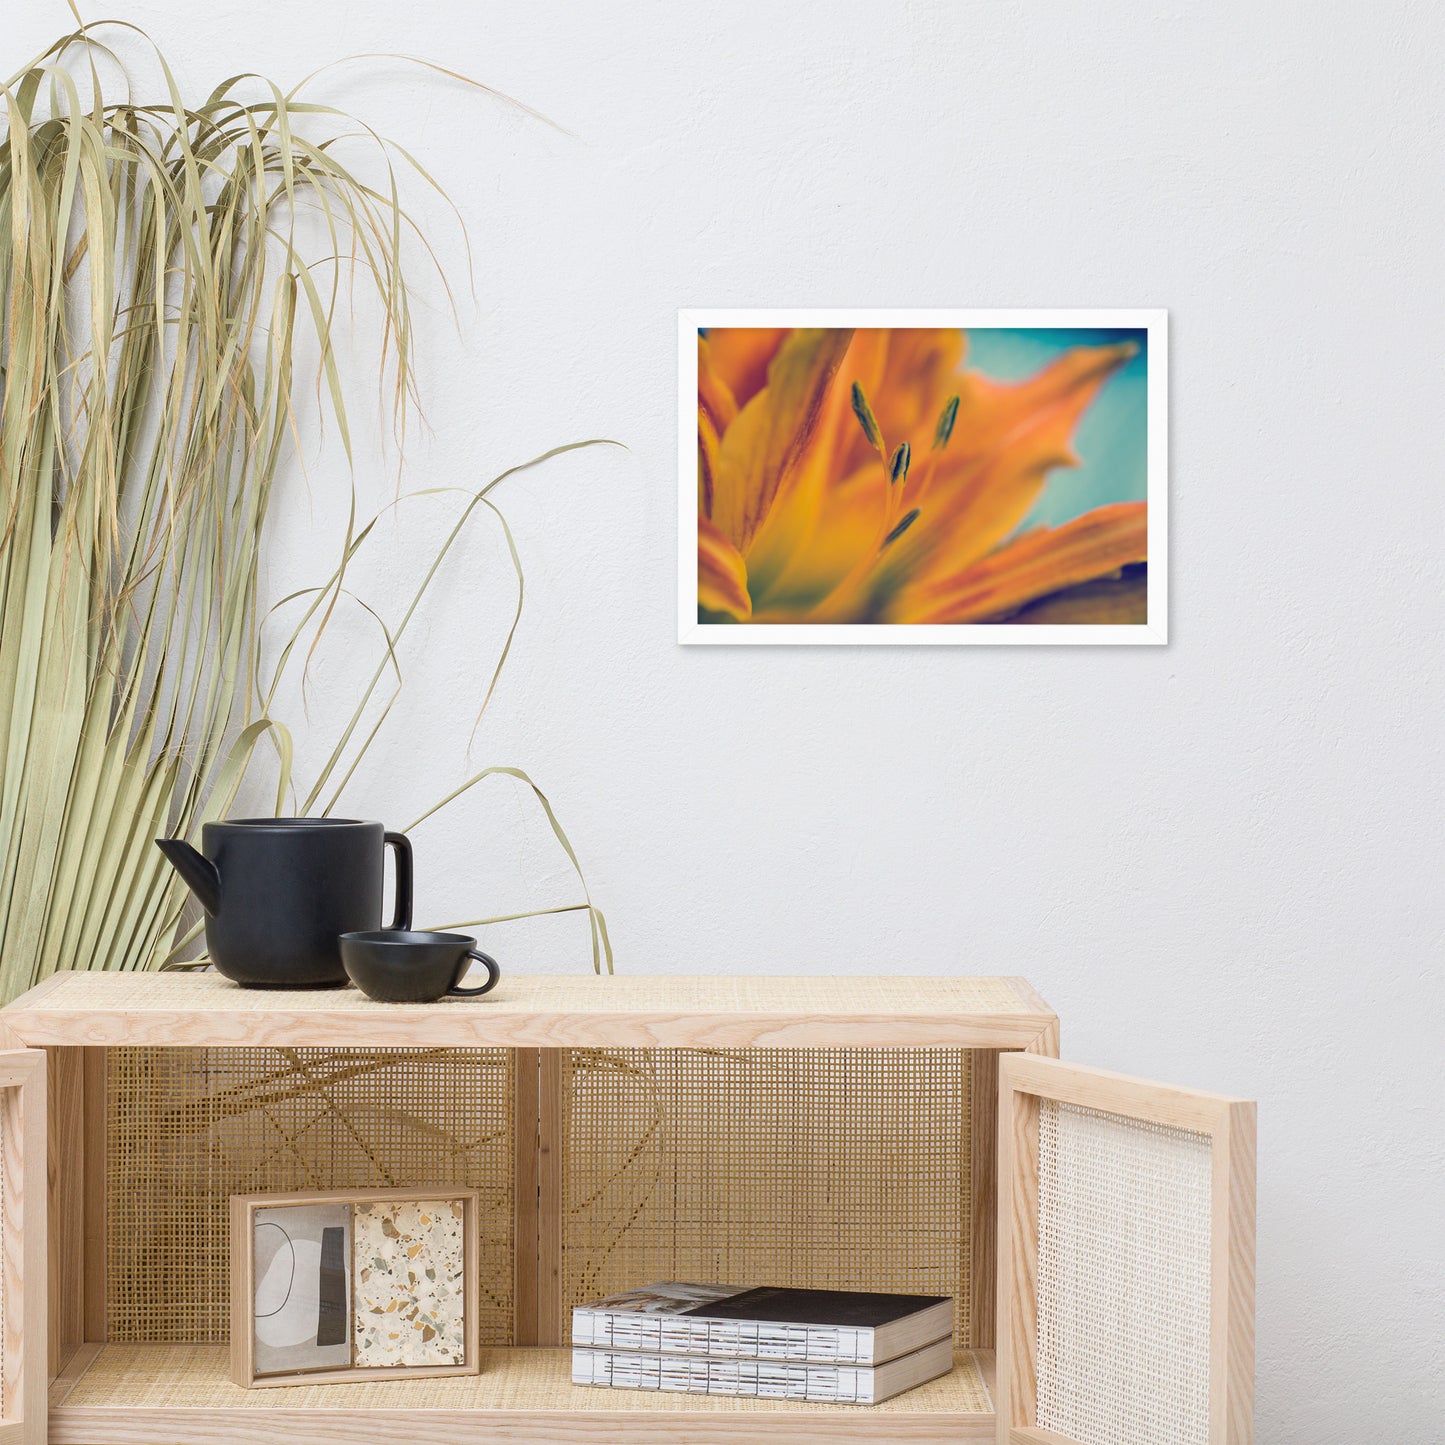 Mystical Tiger Lily Floral Nature Photo Framed Wall Art Print